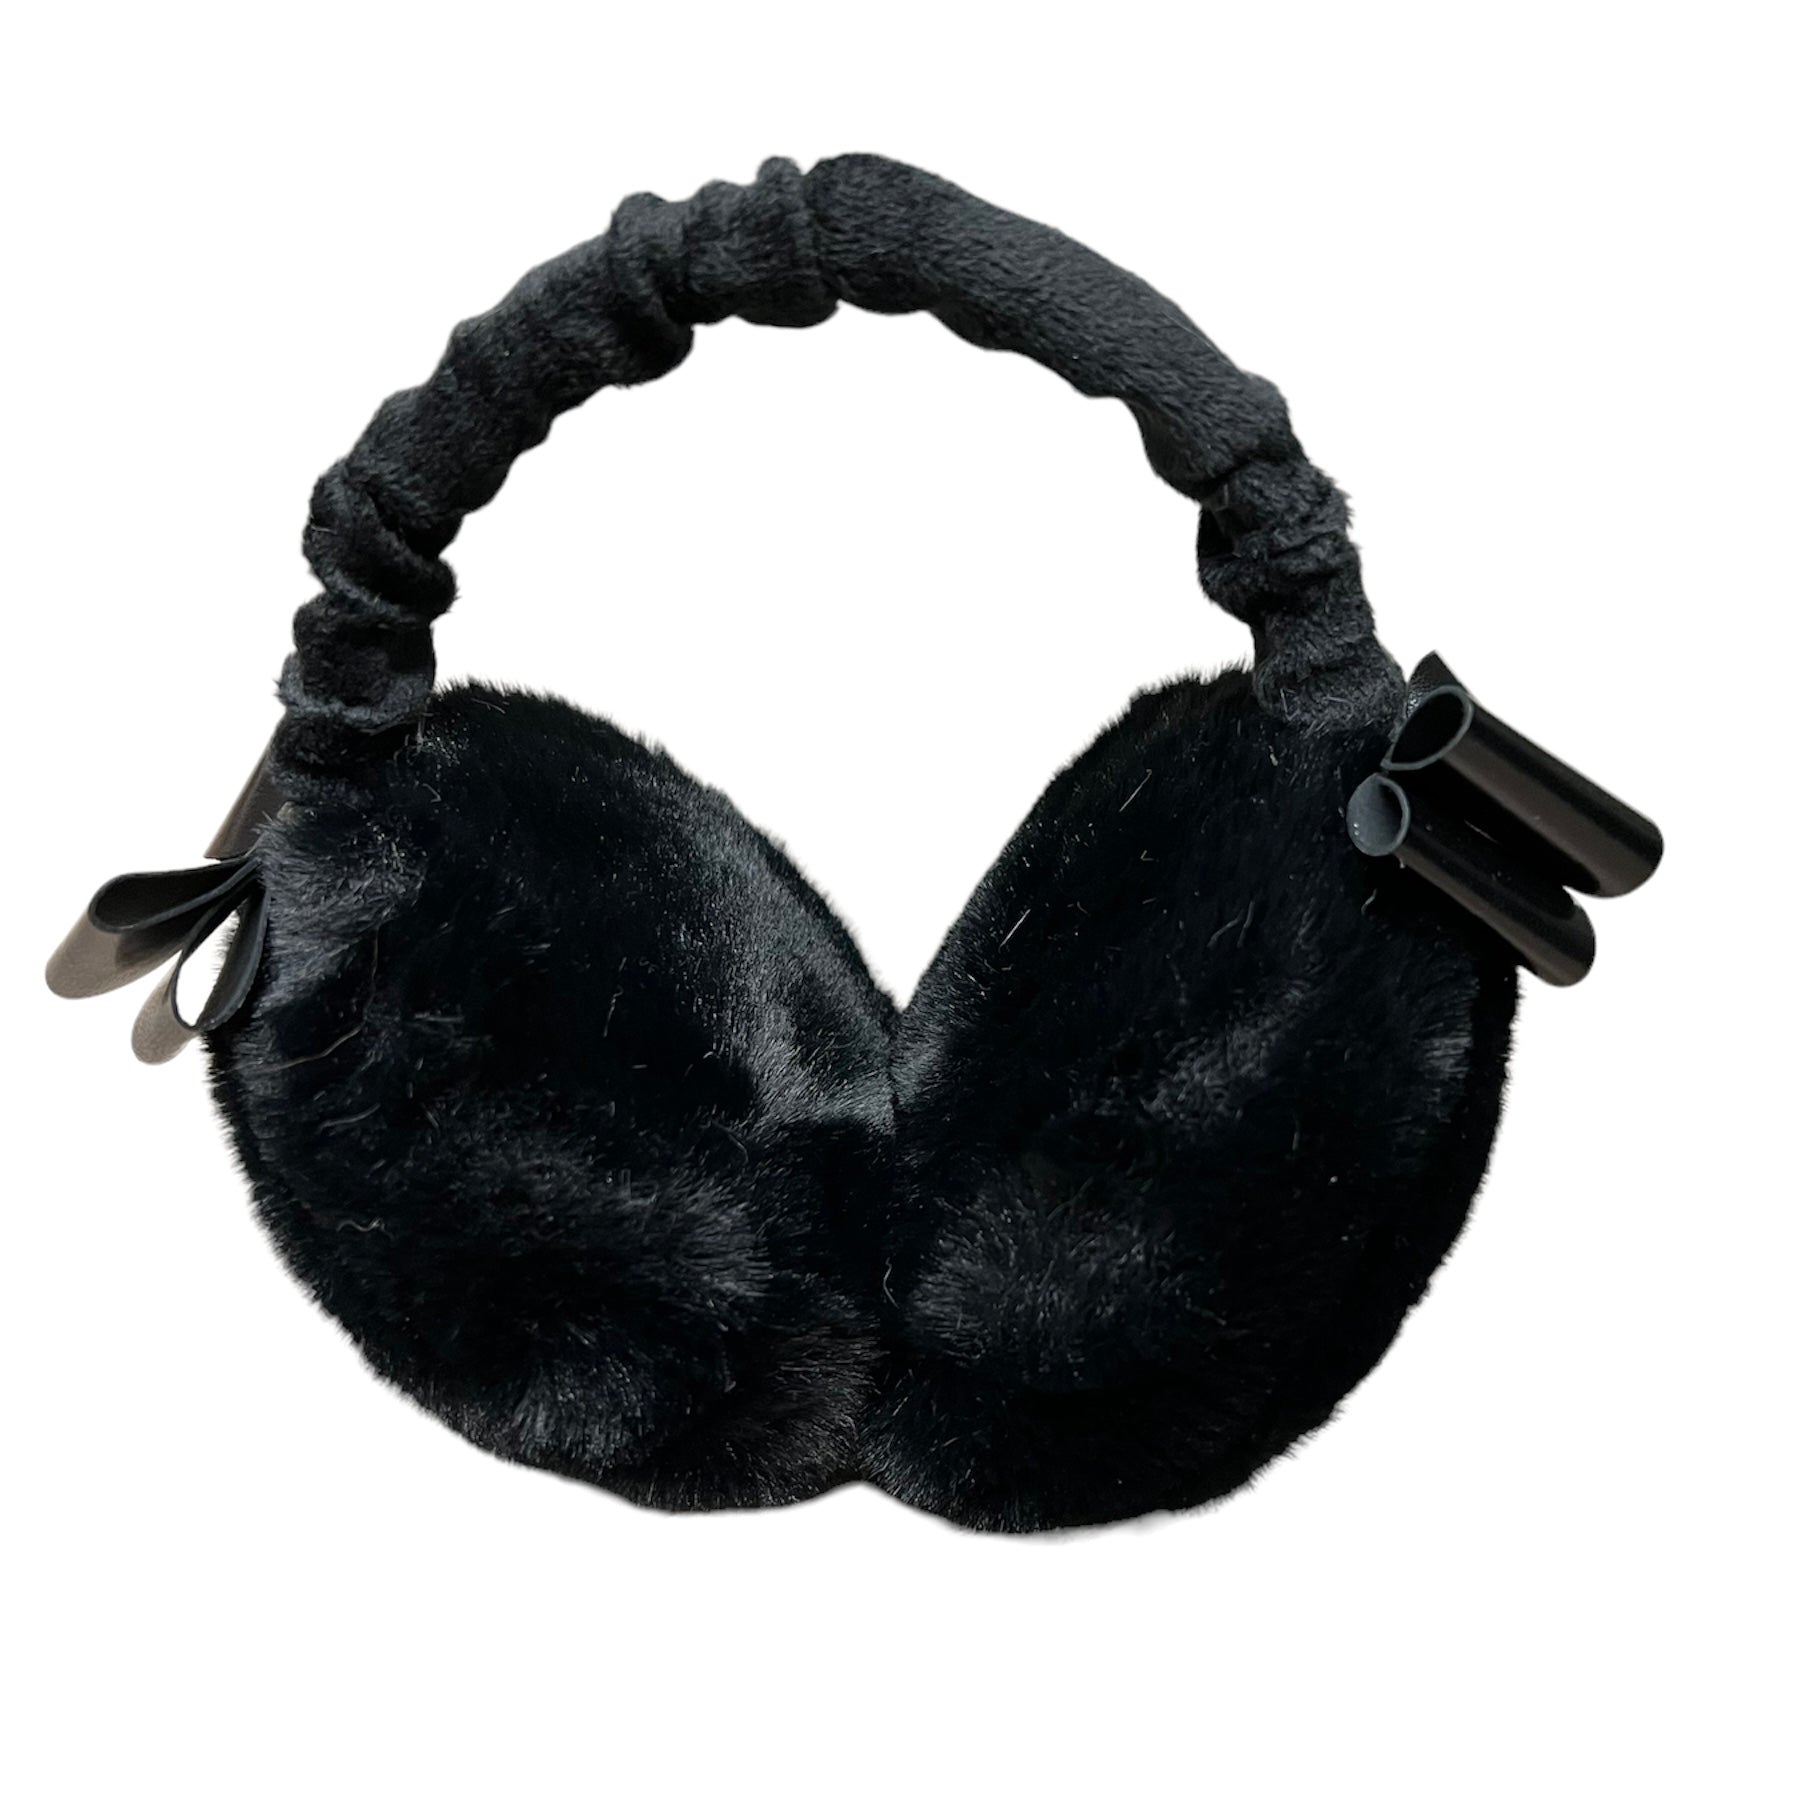 Fluffy adjustable earmuff with leather bows black